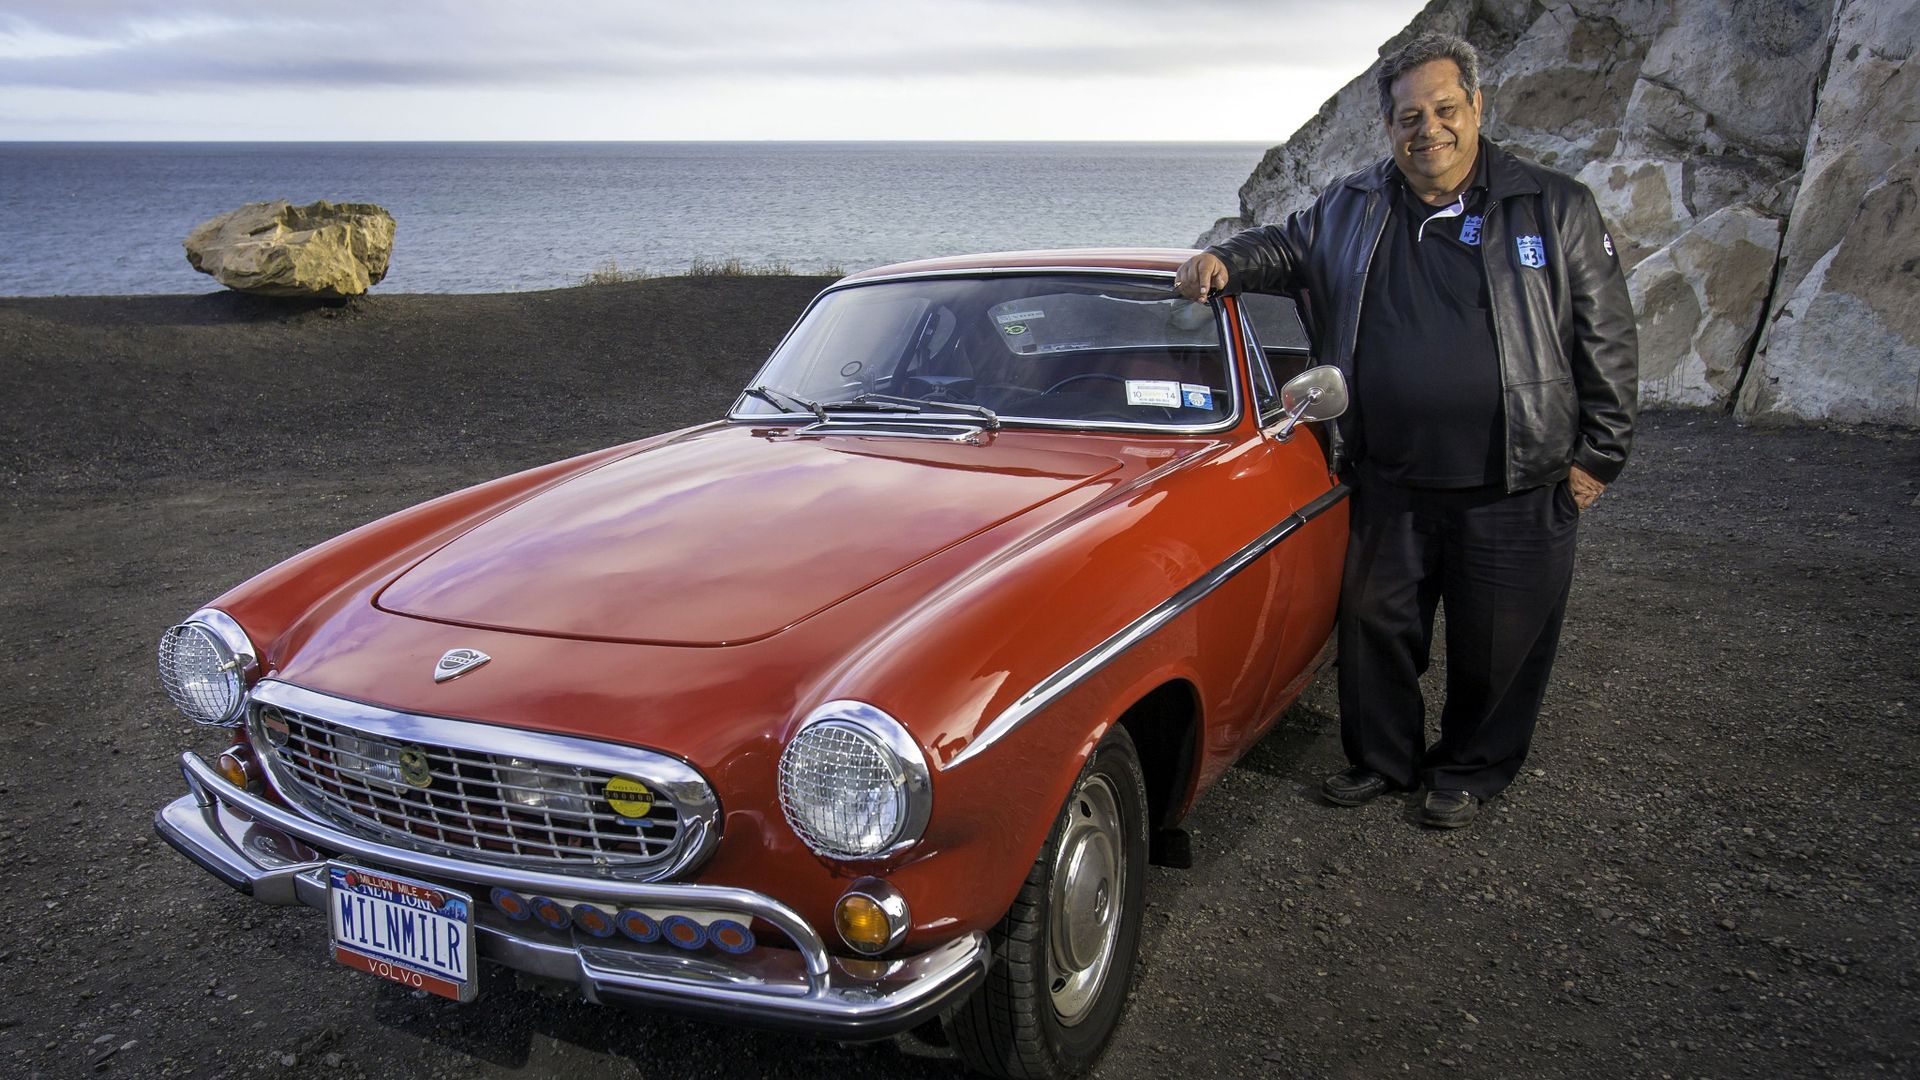 Volvo P1800S and proud owner Irv Gordon